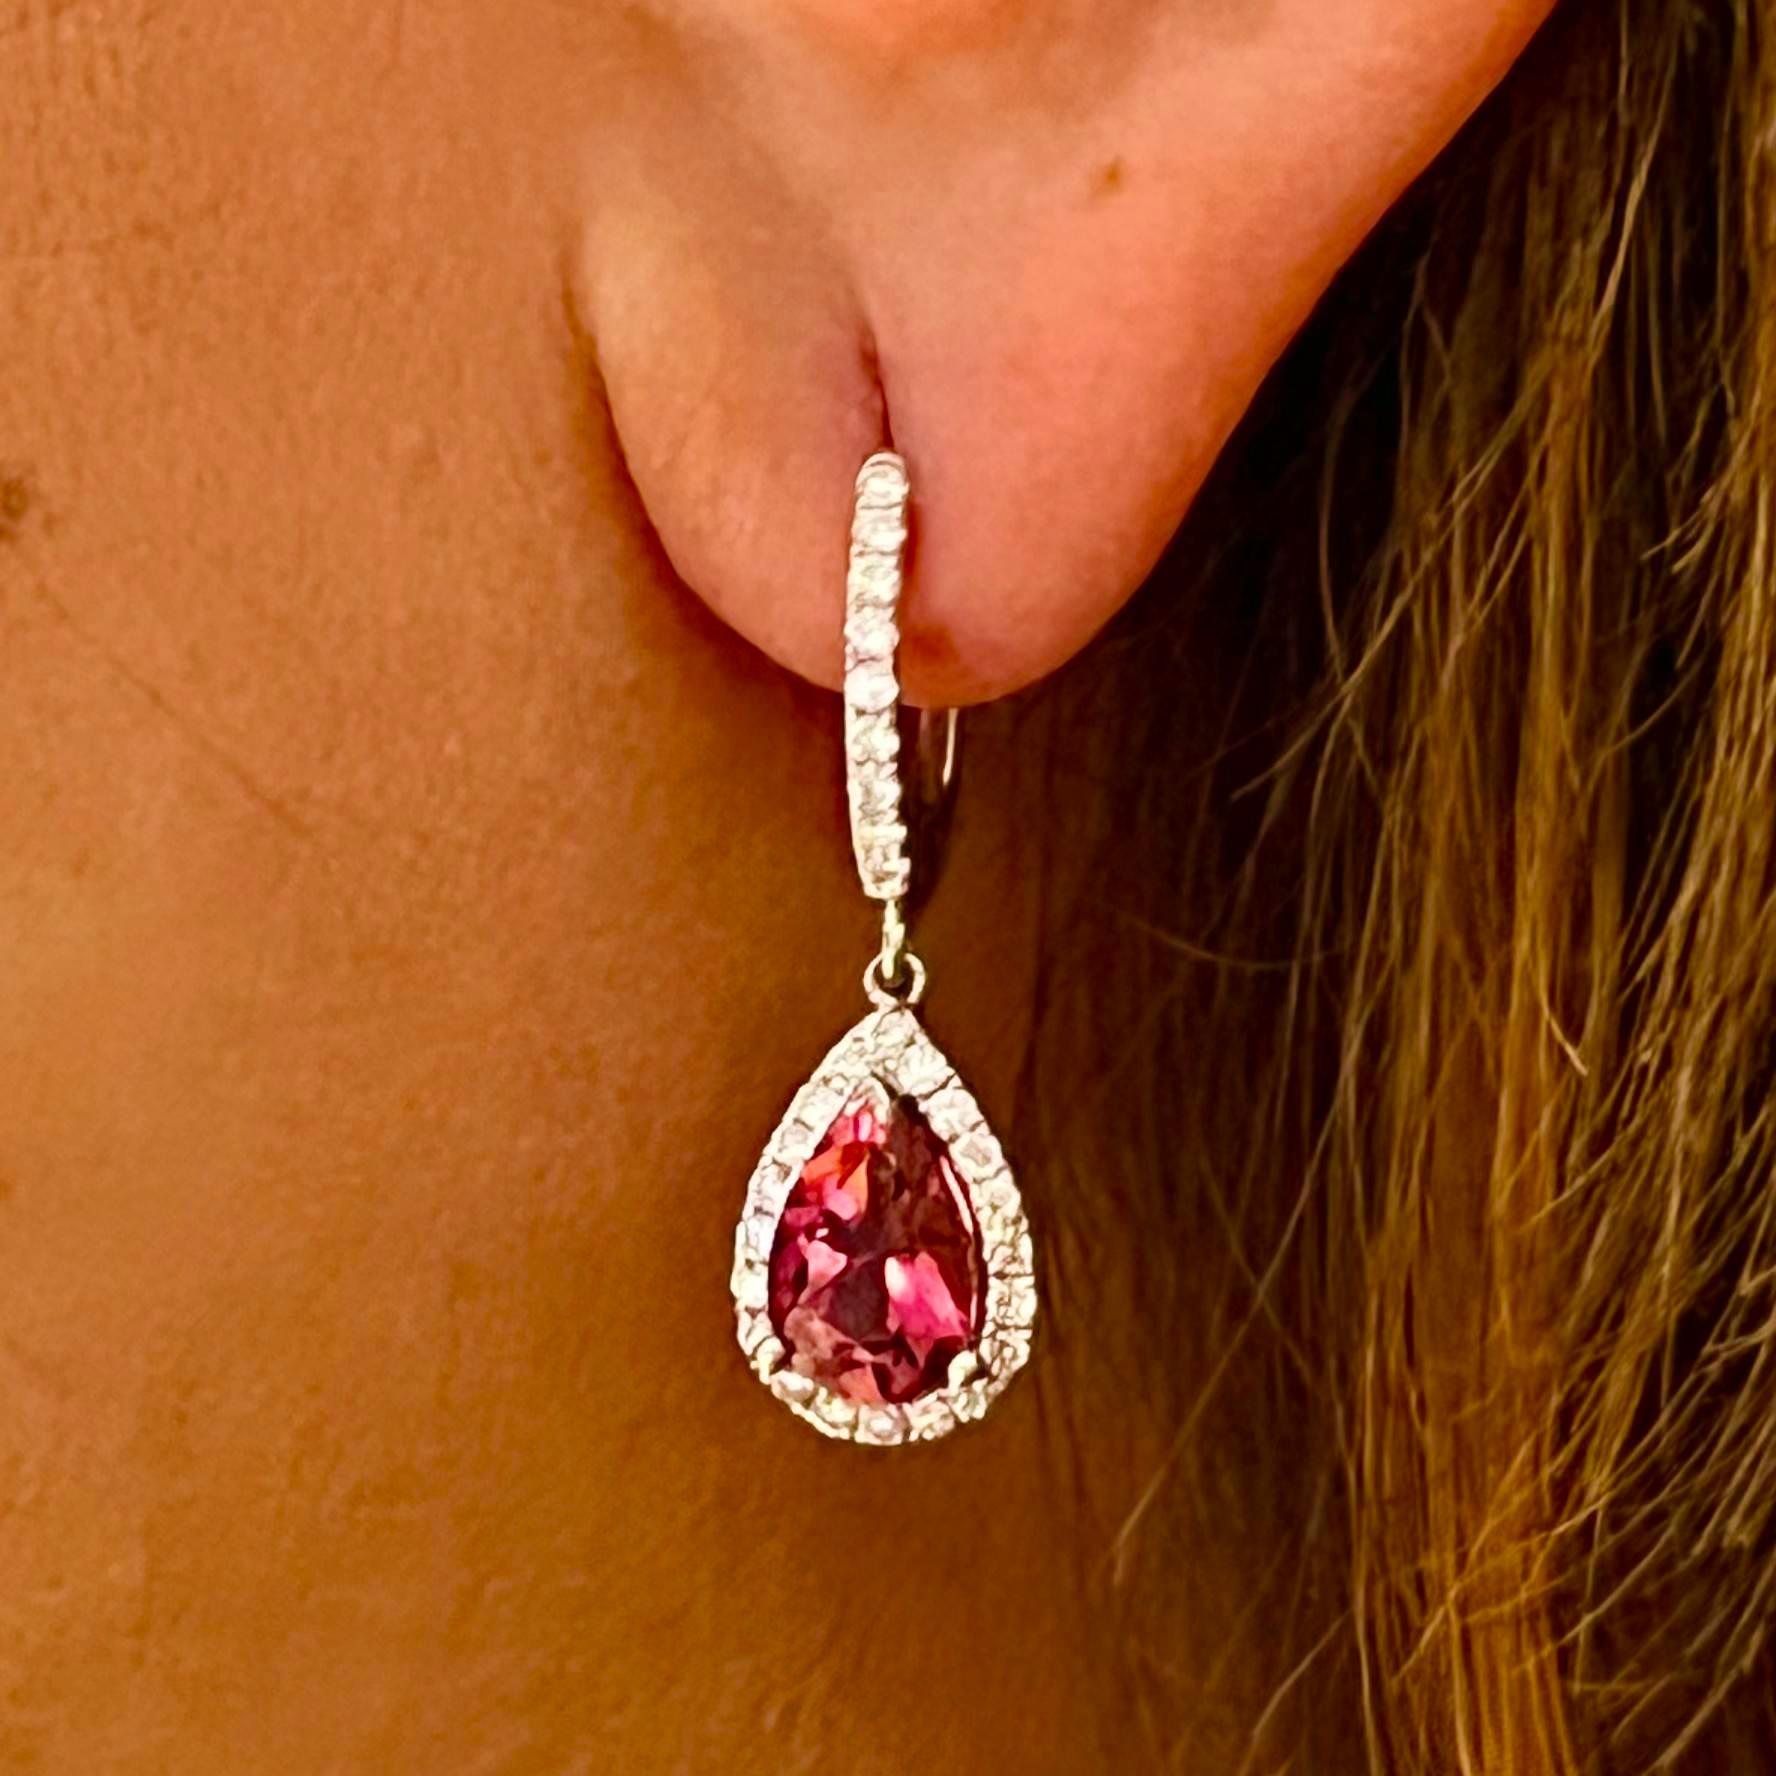 Natural Finely Faceted Quality Diamond Rubellite Tourmaline Drop Earrings 18k W Gold 2.93 TCW Certified $5,950 210764

This is a Unique Custom Made Glamorous Piece of Jewelry!

Nothing says, “I Love you” more than Diamonds and Pearls!

These